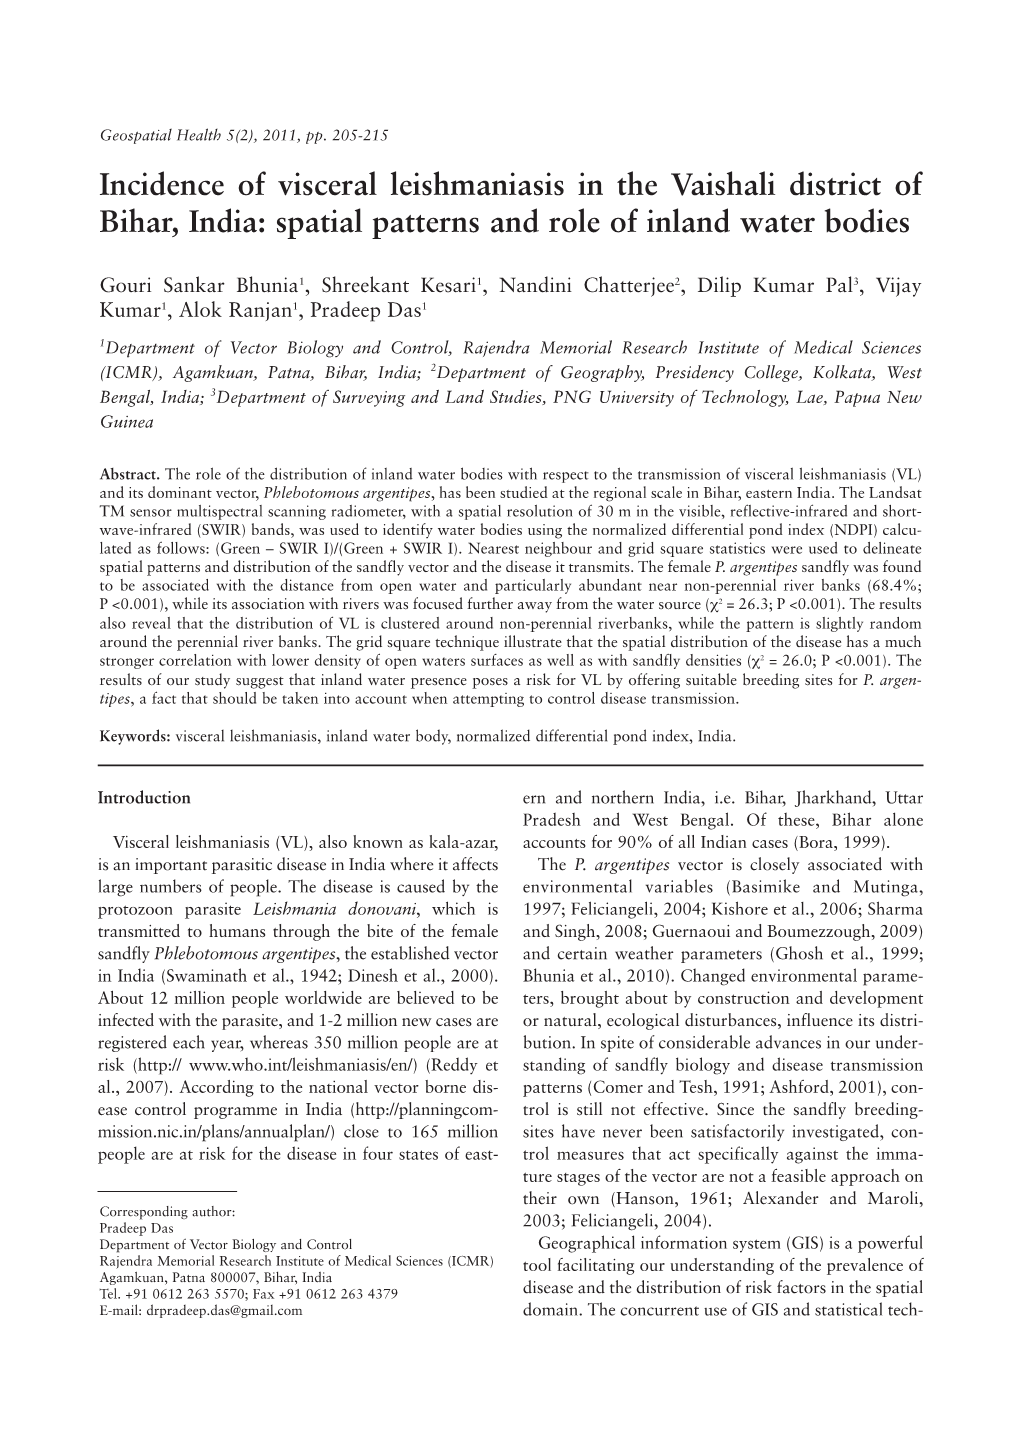 Incidence of Visceral Leishmaniasis in the Vaishali District of Bihar, India: Spatial Patterns and Role of Inland Water Bodies